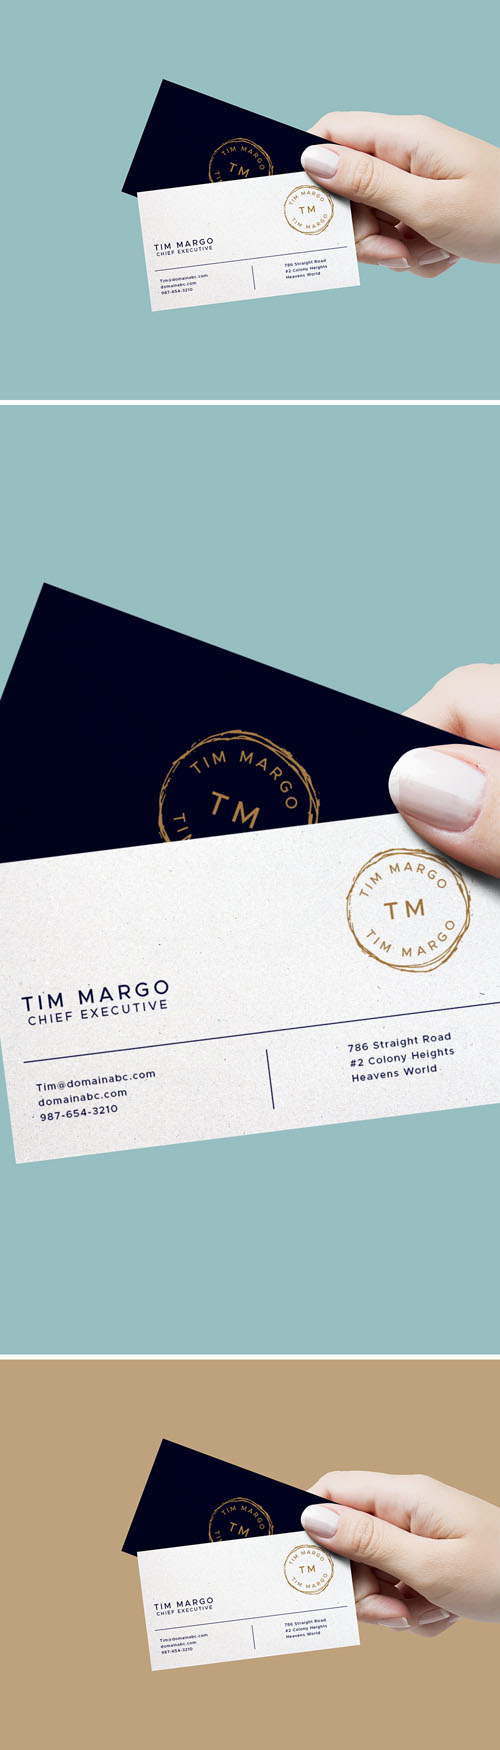 Hand Holding Business Cards PSD Mockup